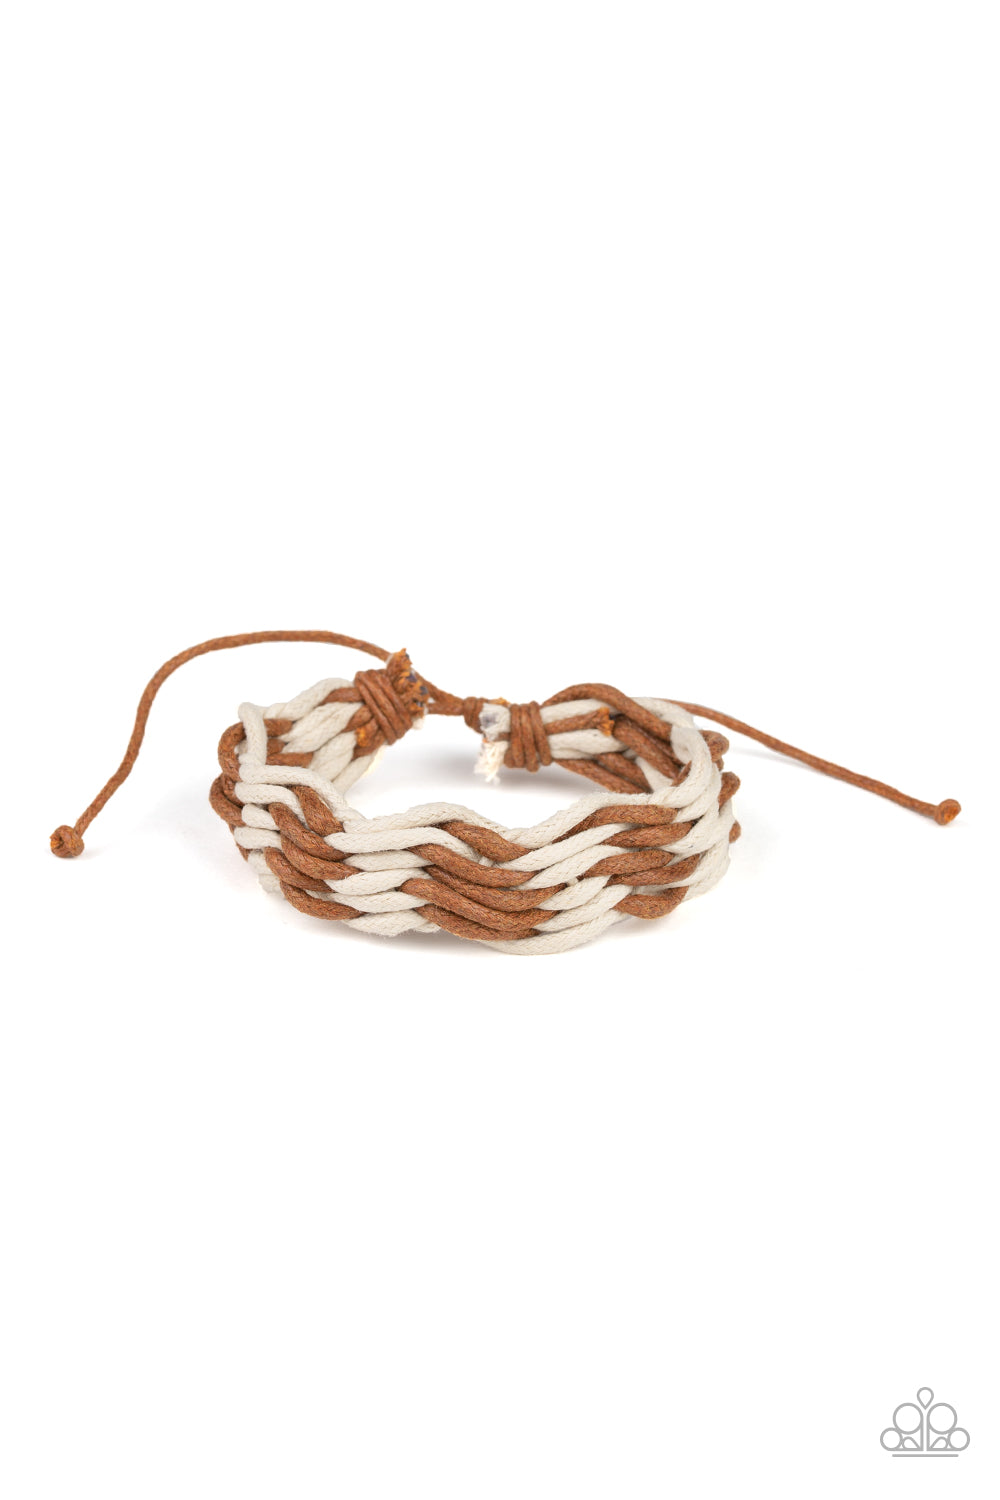 WEAVE High and Dry - Brown urban bracelet